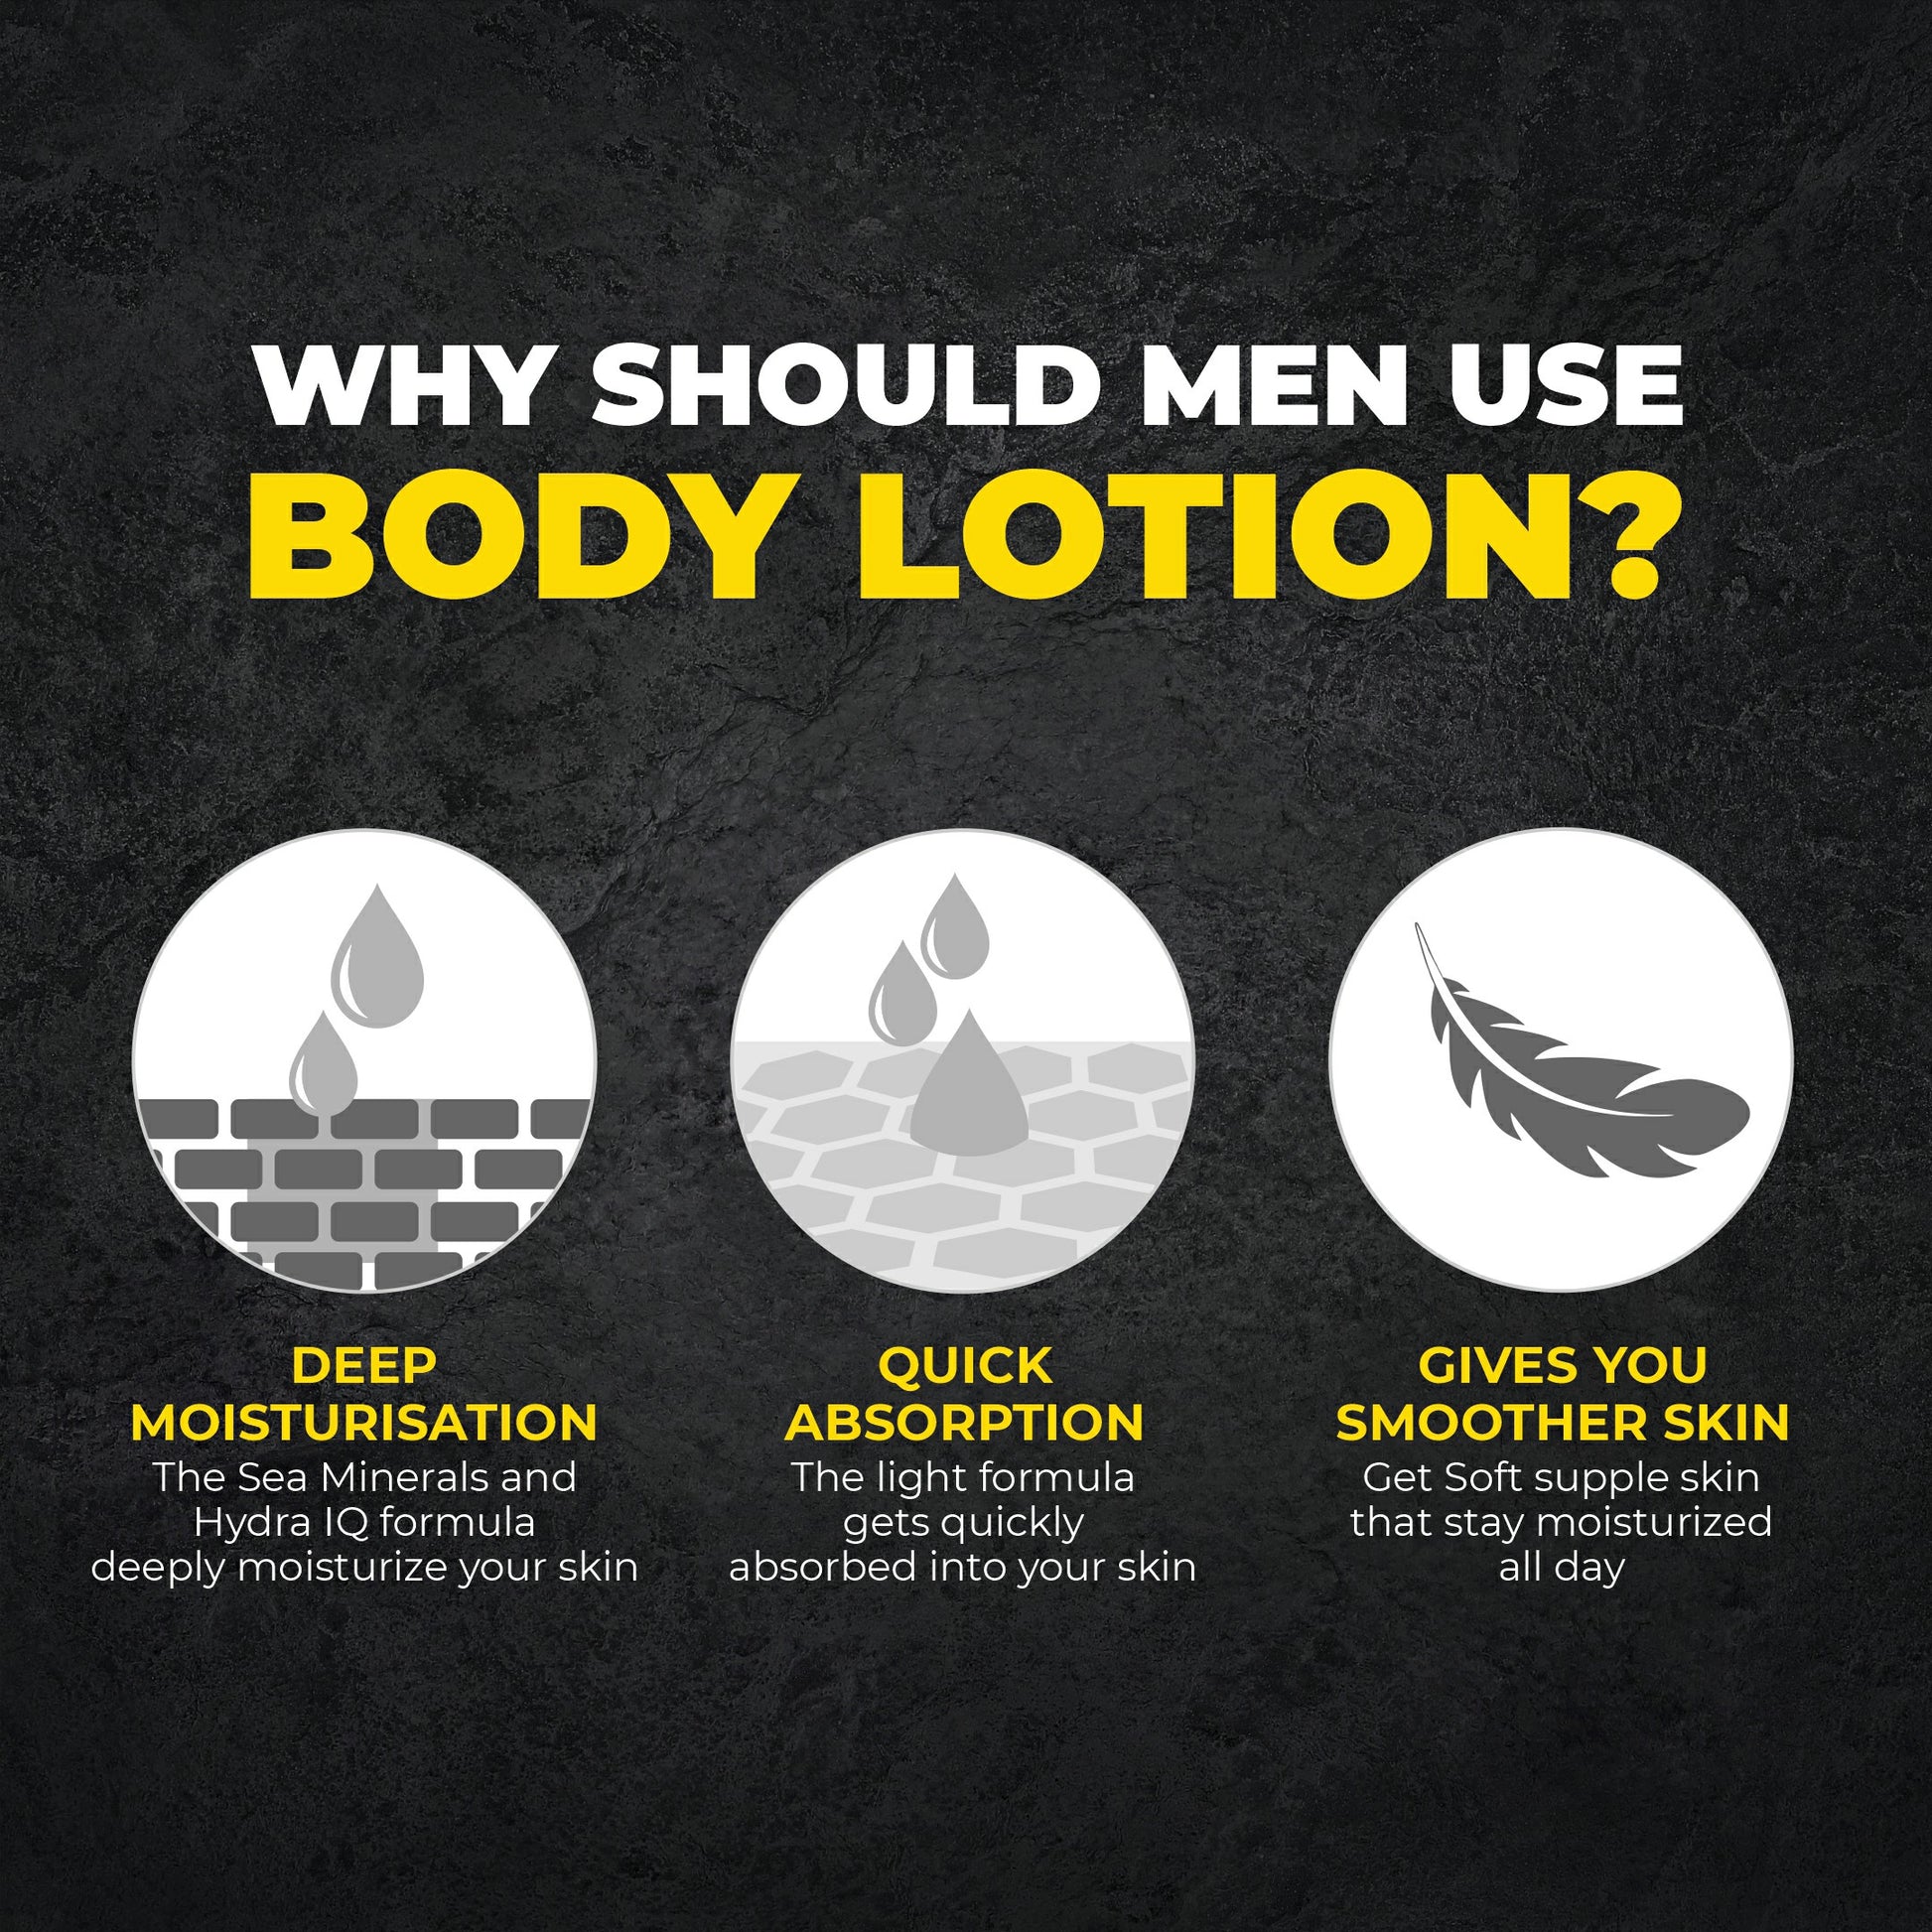 why should men use body lotion?, hydra IQ formula, deep moisturisation, quick absorption, smoother skin